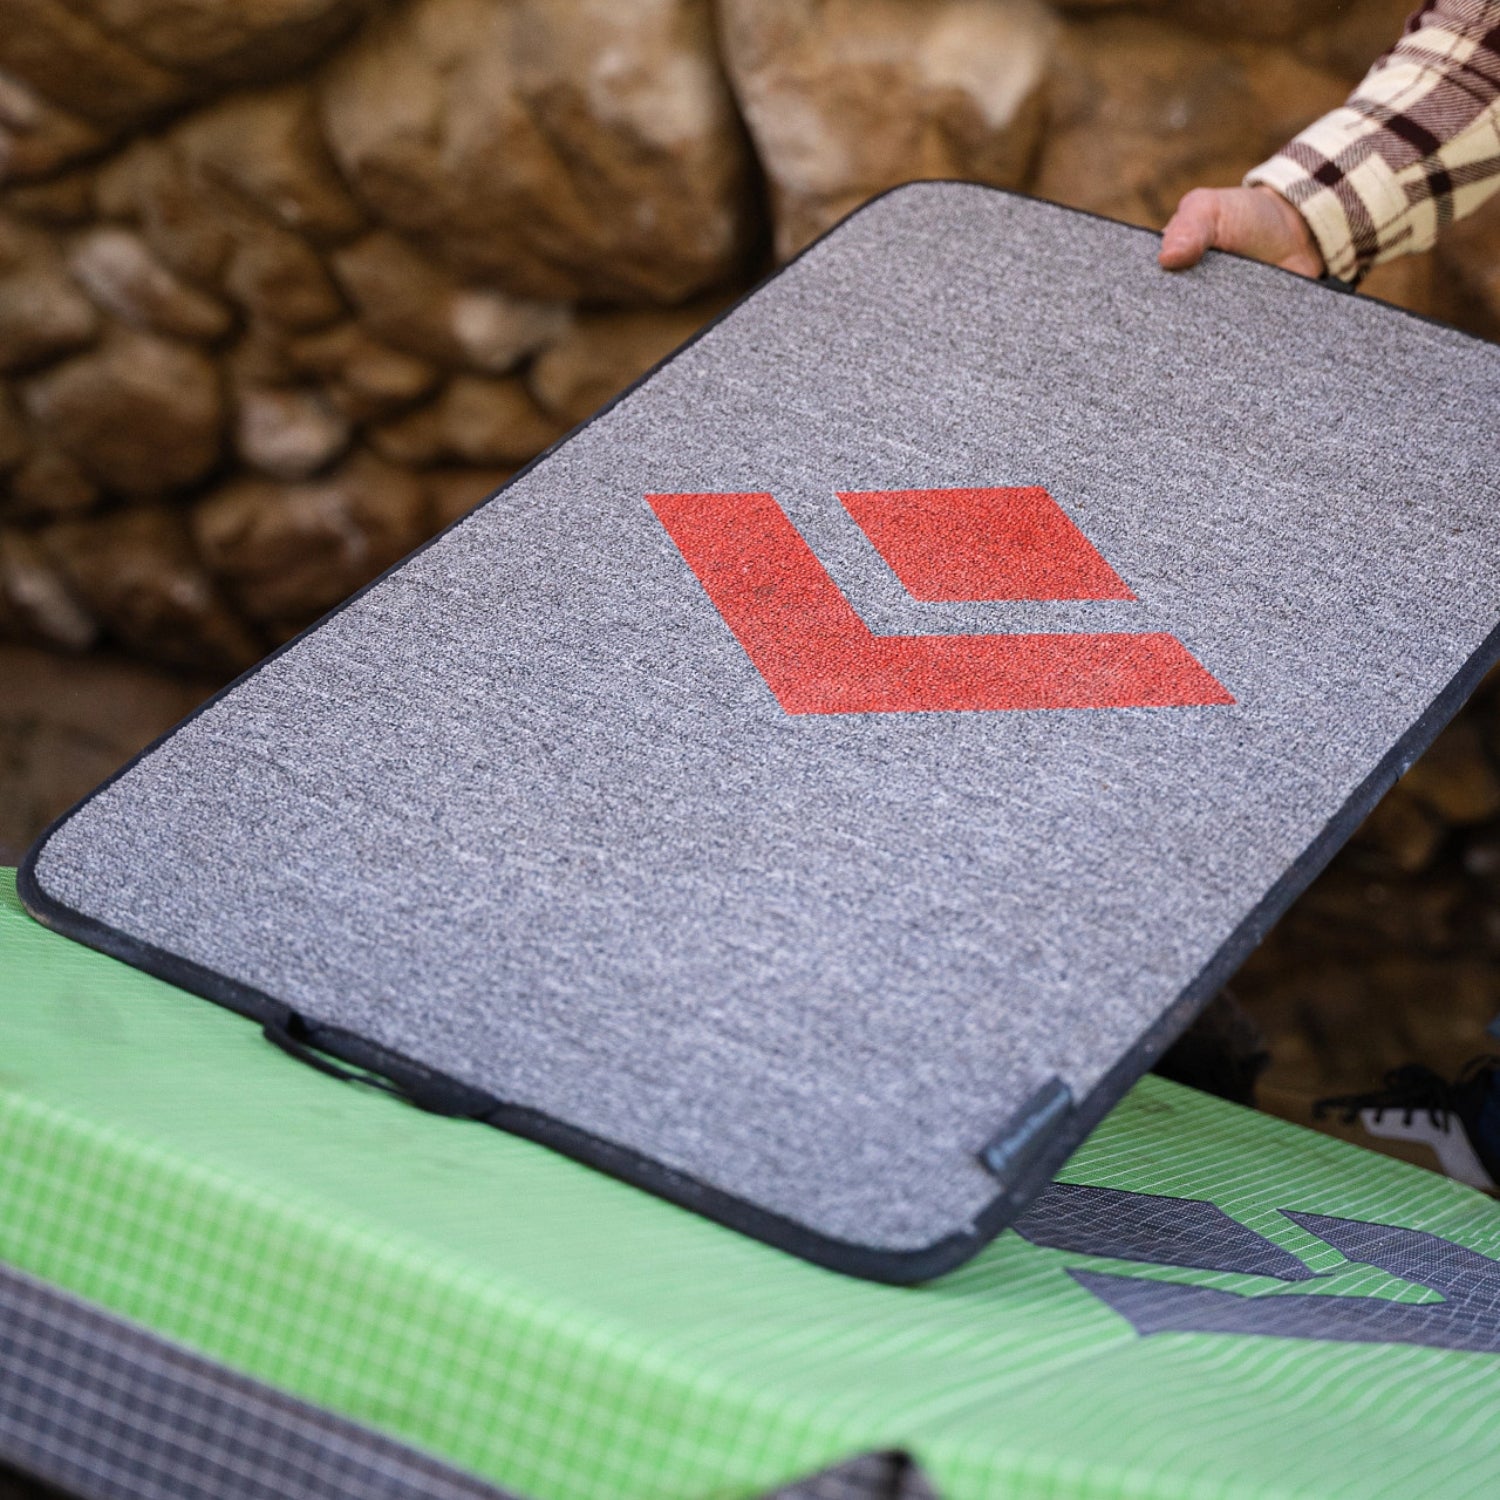 Black Diamond Sitstarter Boulder Accessory Mat in grey with red logo